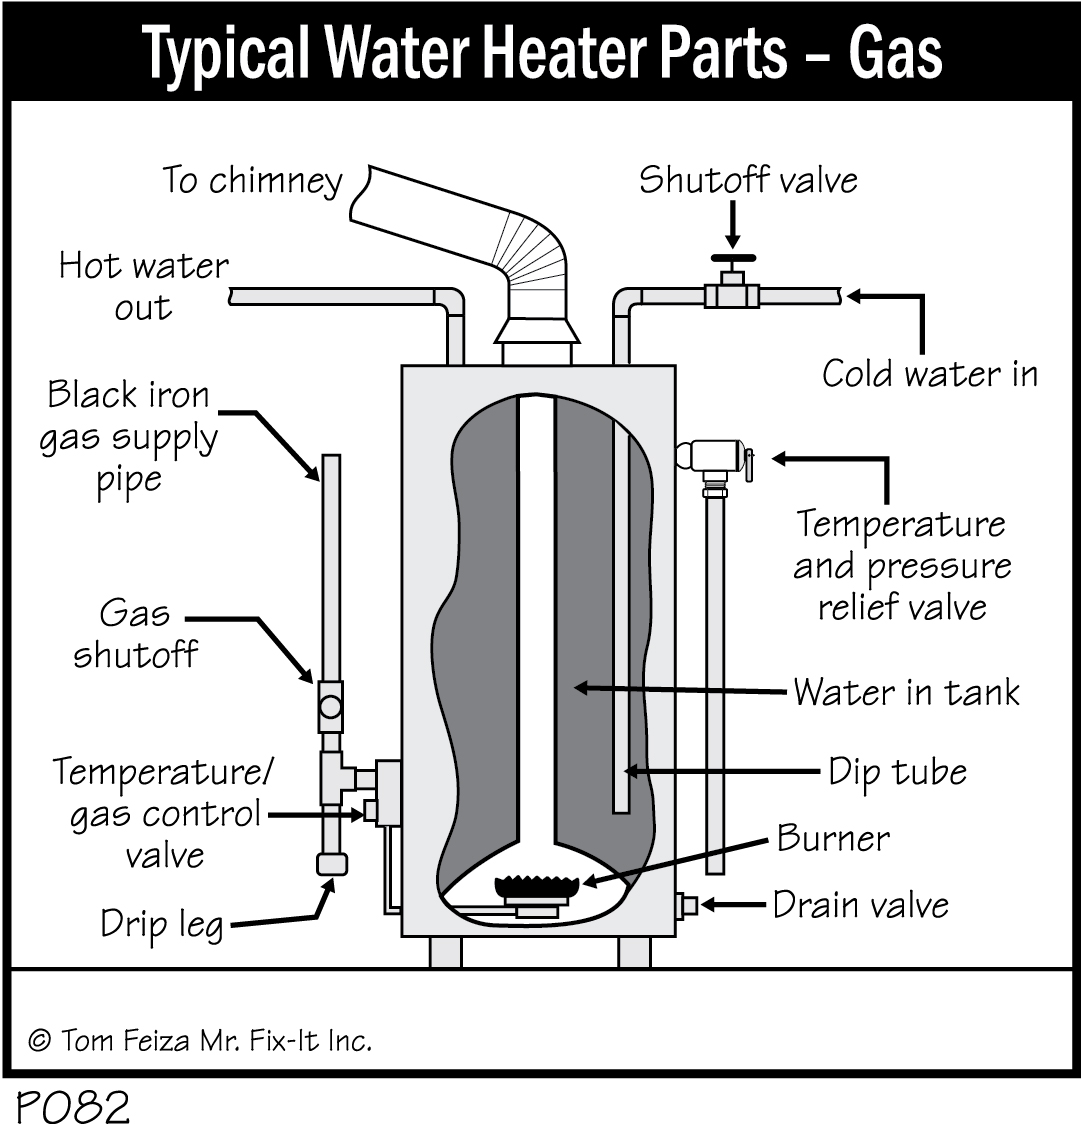 P082 - Typical Water Heater Parts - Gas